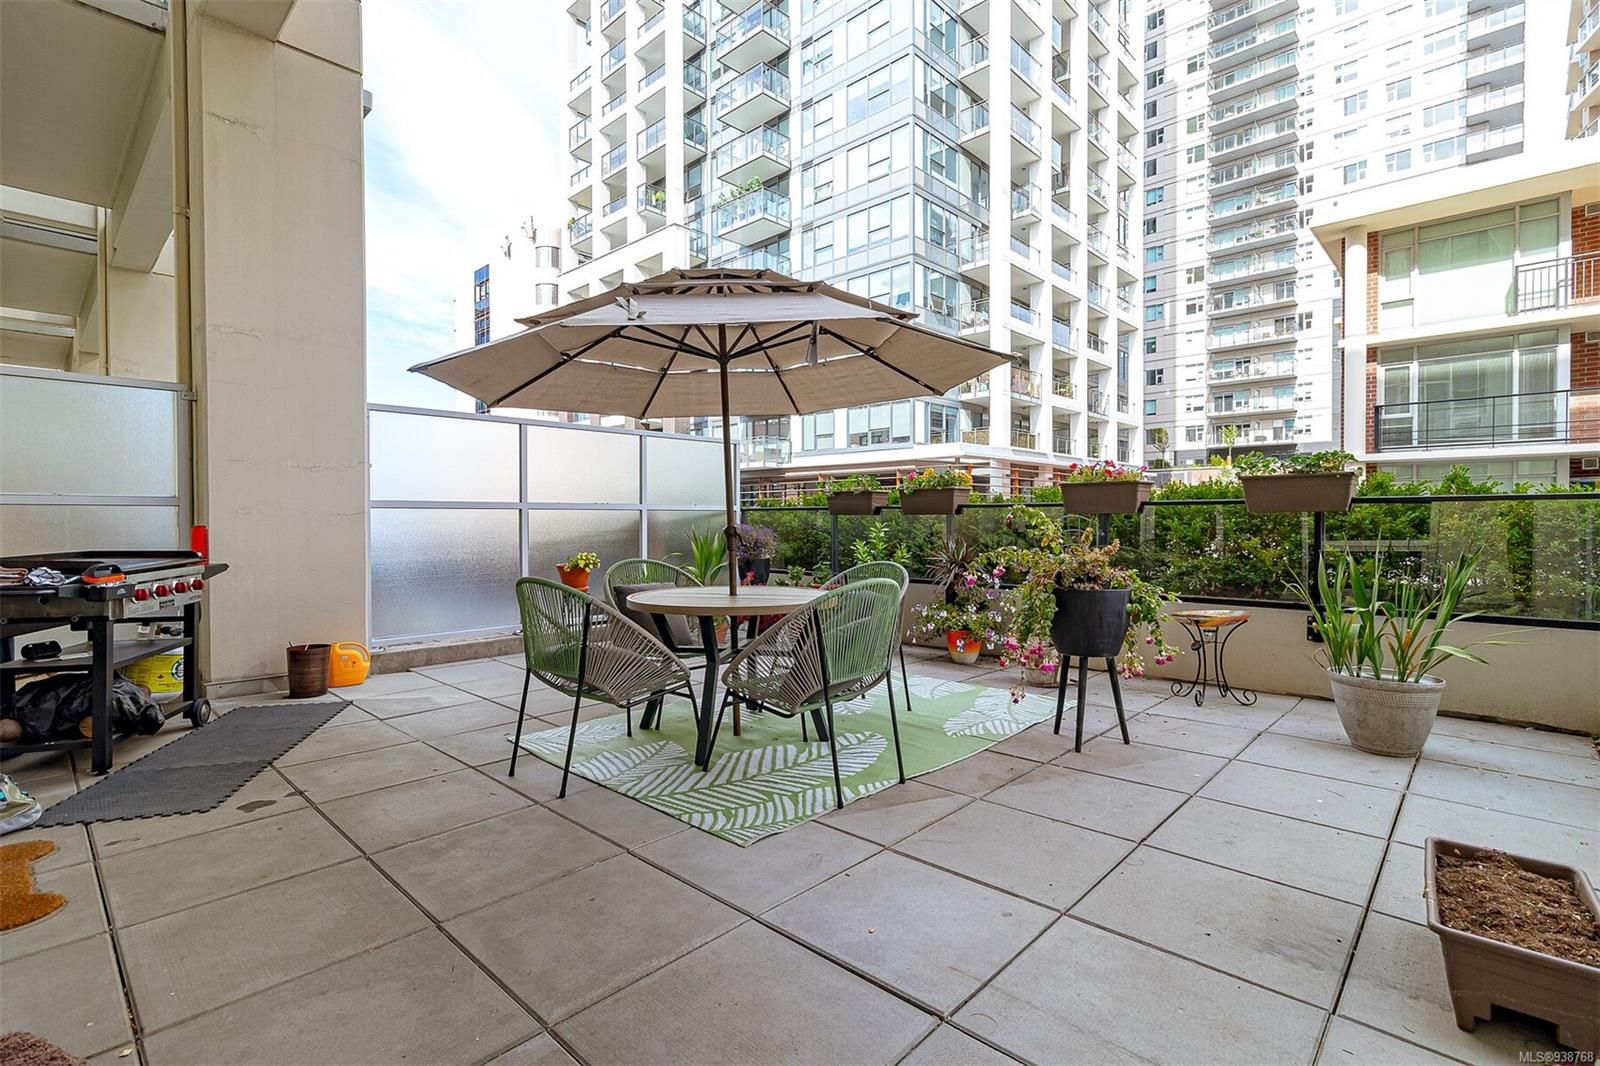 Your Own Private, over 400 sq ft Patio!